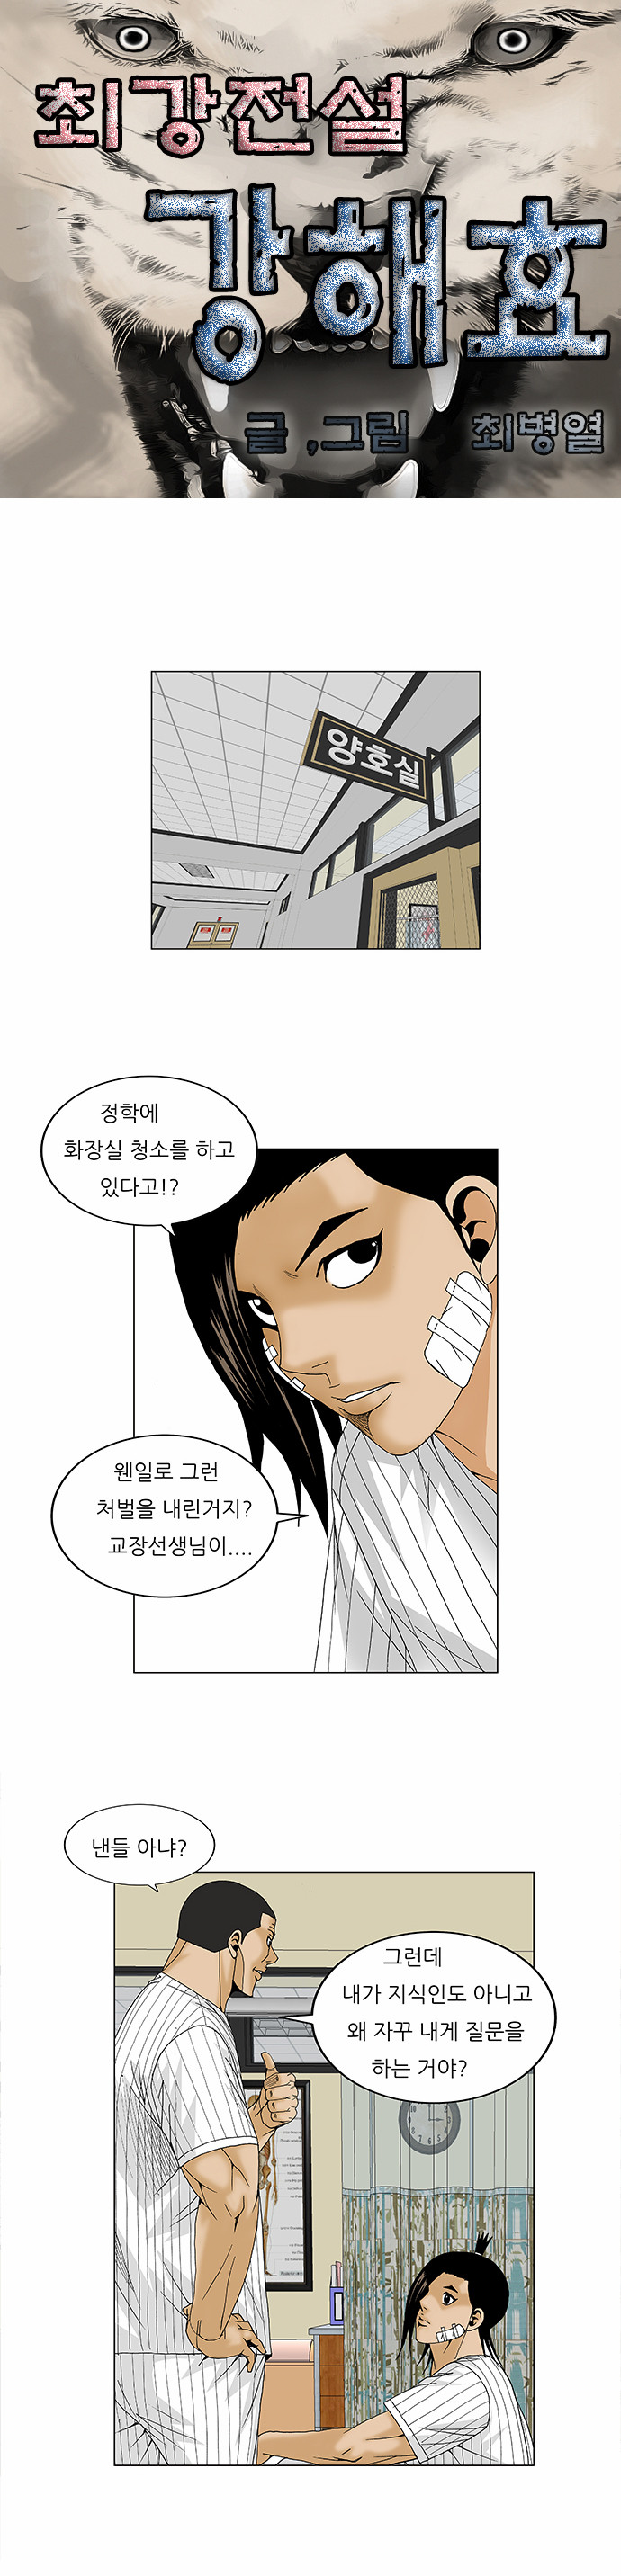 Ultimate Legend - Kang Hae Hyo - Chapter 98 - Page 4